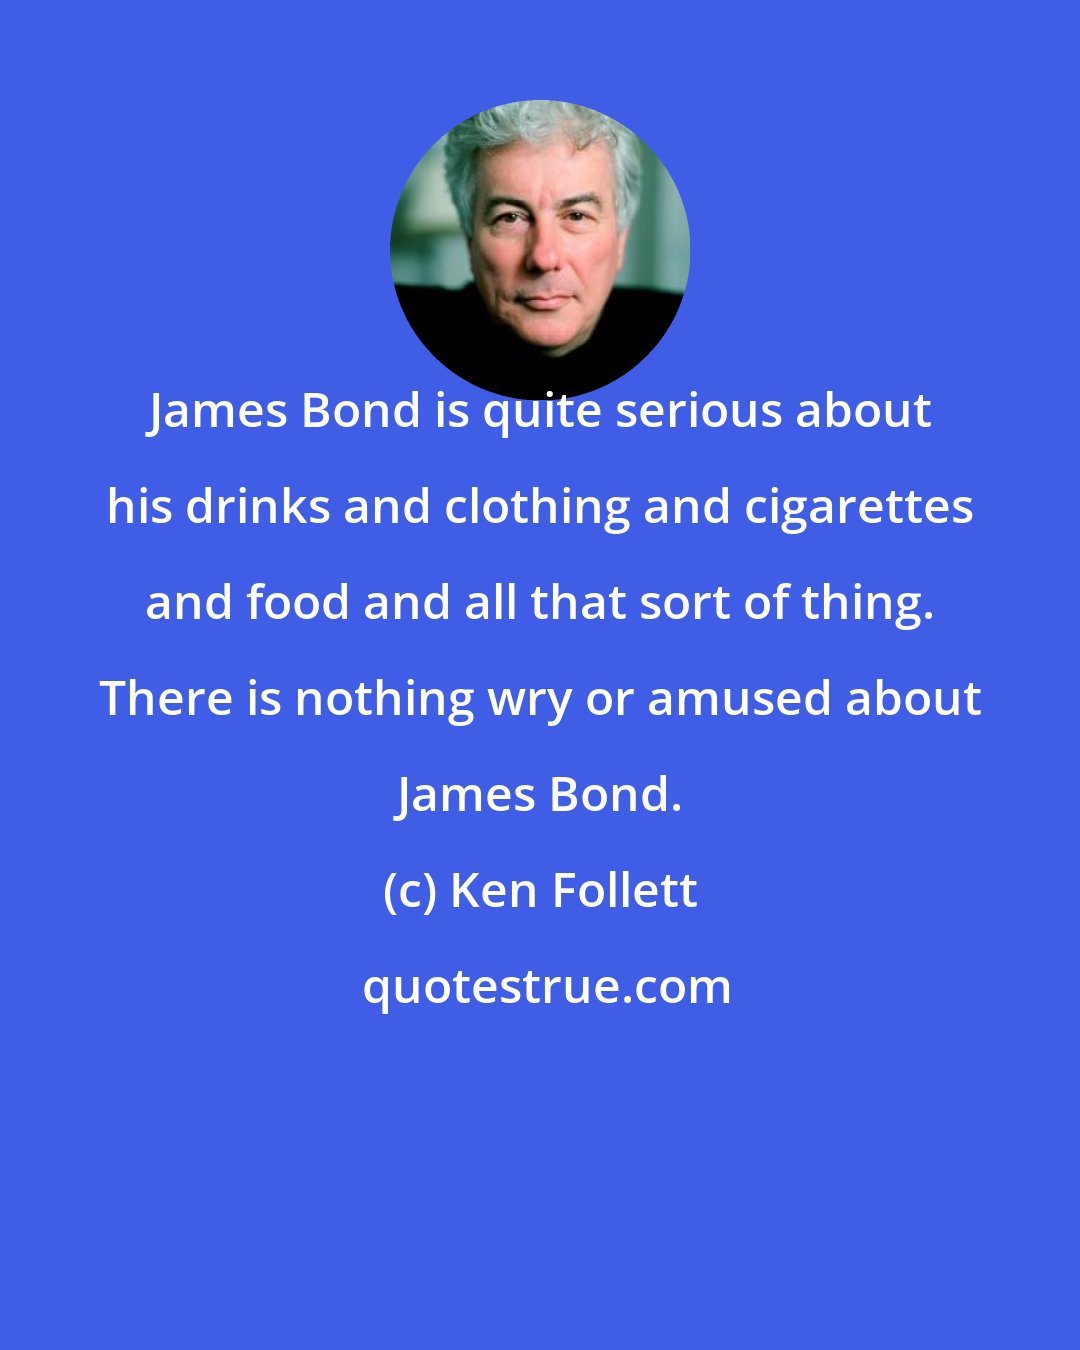 Ken Follett: James Bond is quite serious about his drinks and clothing and cigarettes and food and all that sort of thing. There is nothing wry or amused about James Bond.